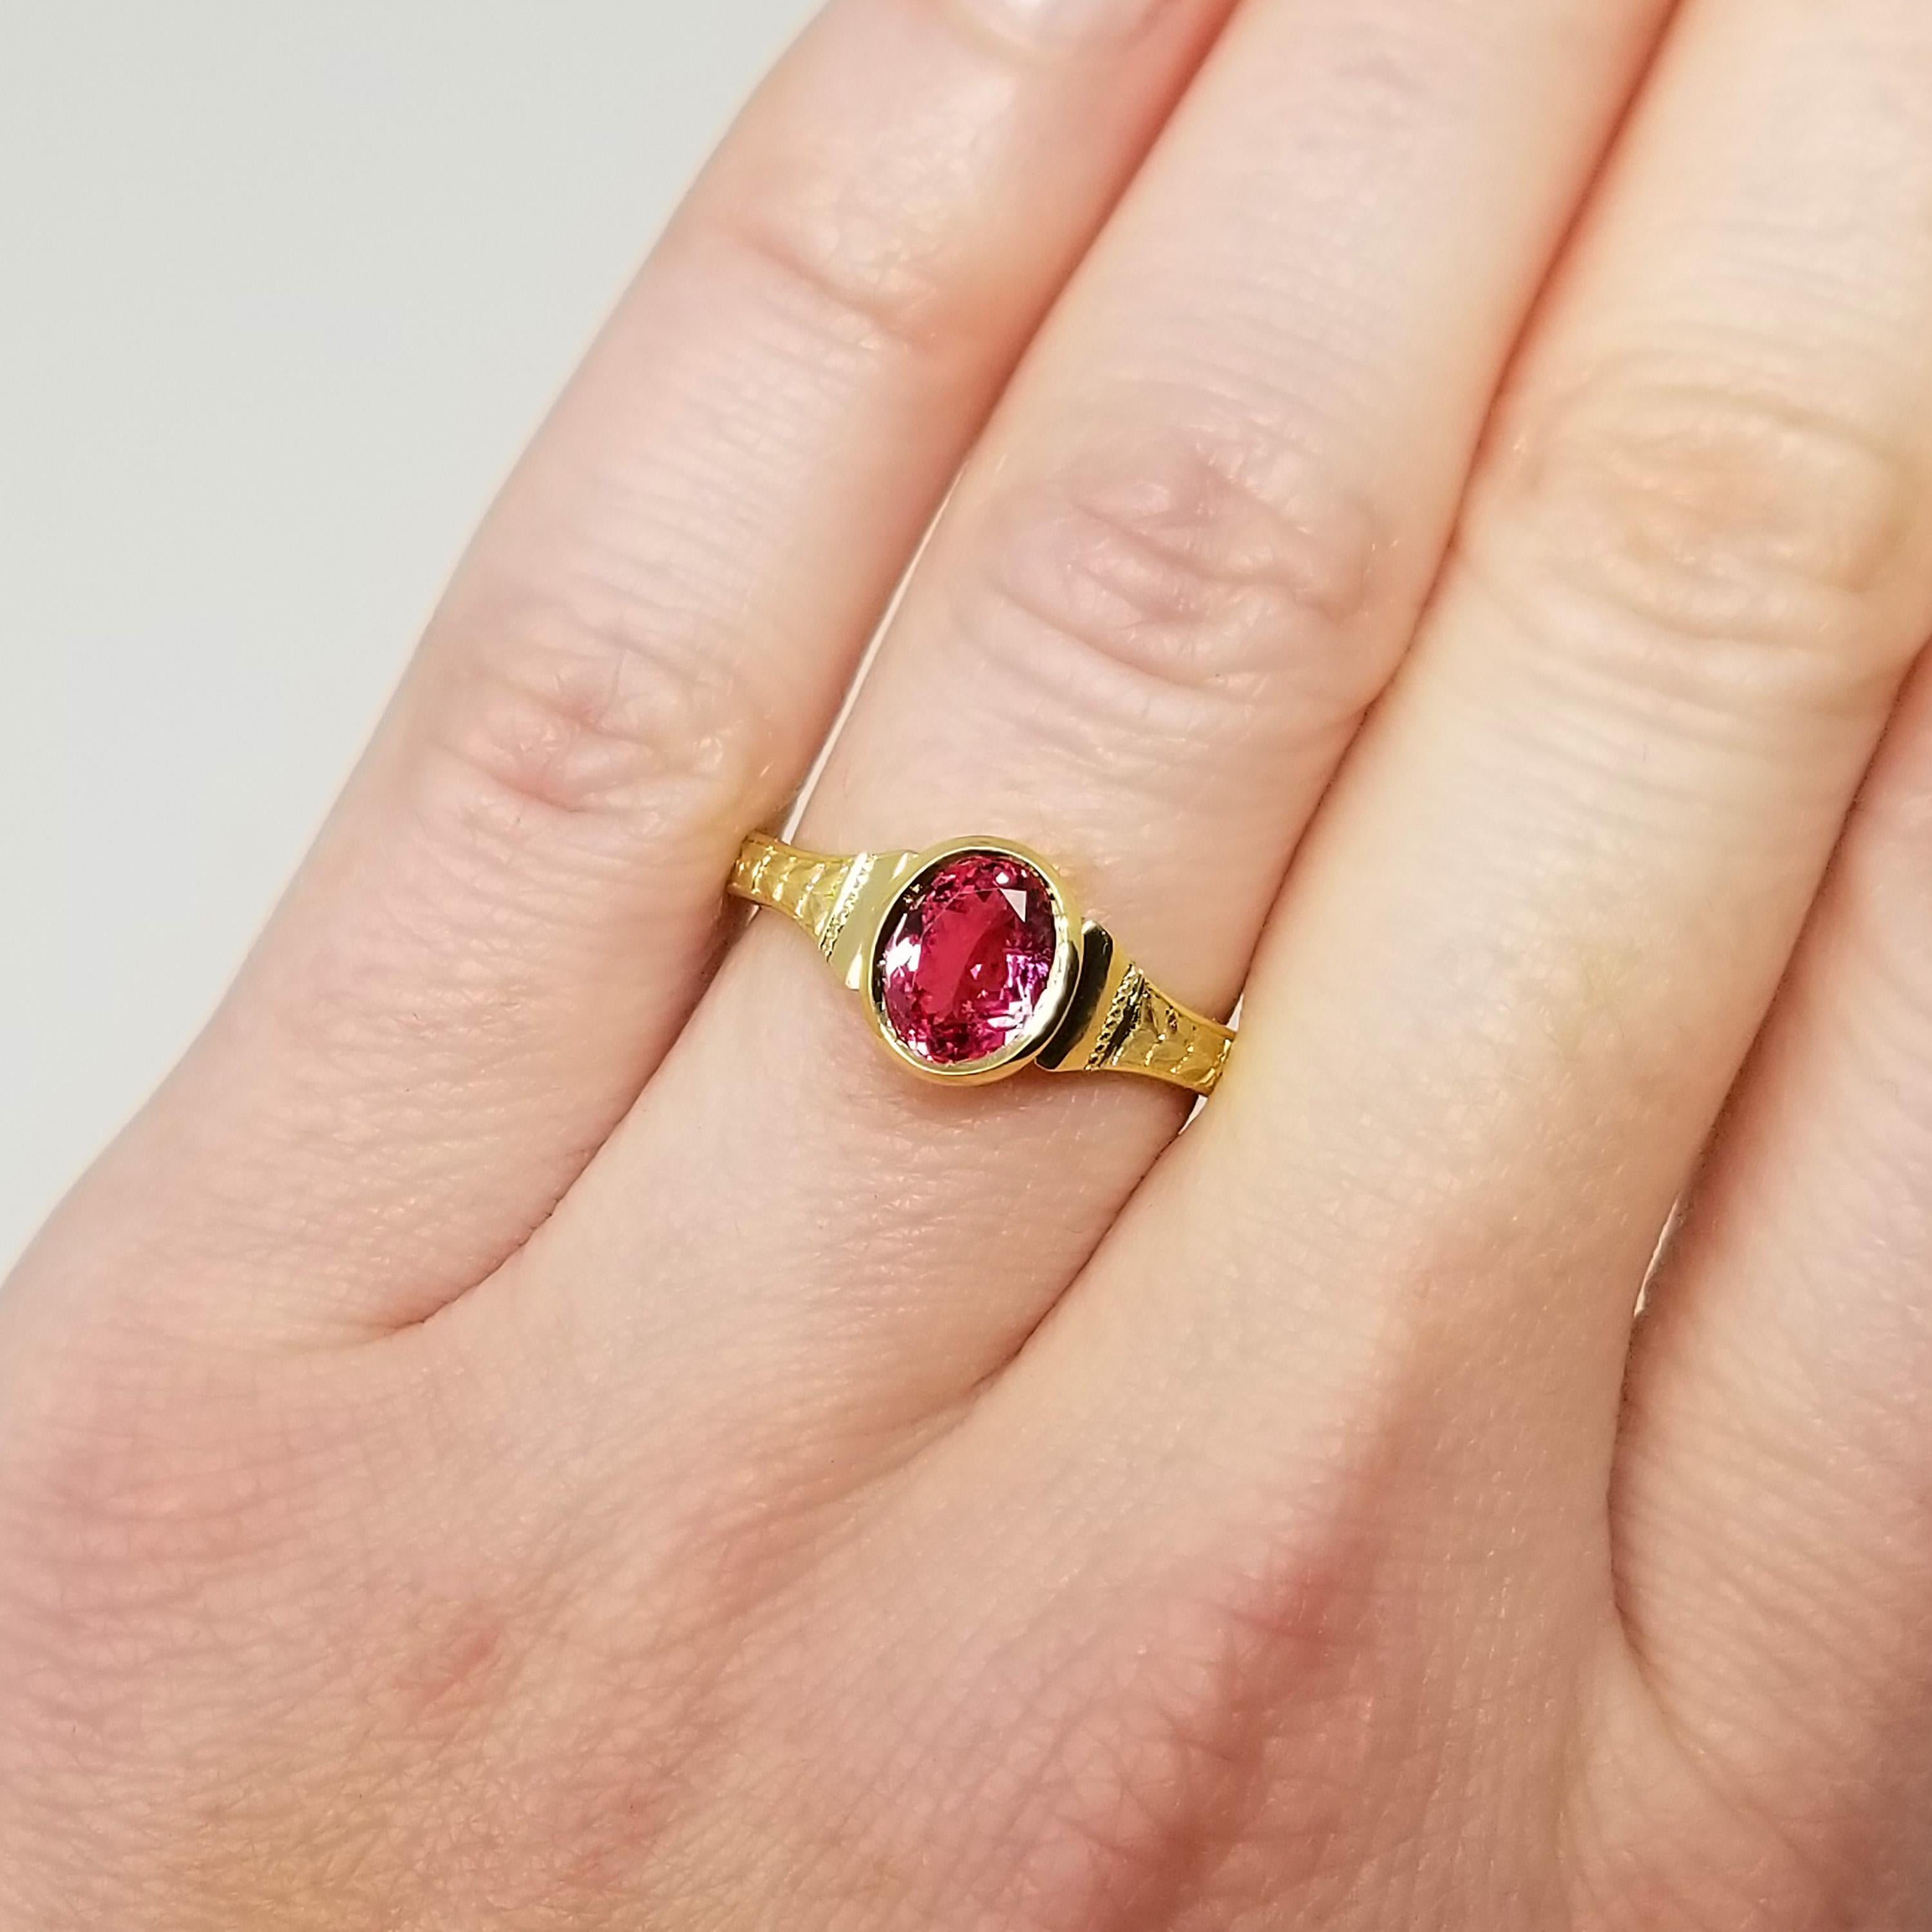 The Cassandra Ring is the perfect showcase for spectacular gemstones on the smaller side: it frames beautifully, keeps the focus on an important gem, and highlights without distracting. This particular 18kt Cassandra ring features a fiery hot pink